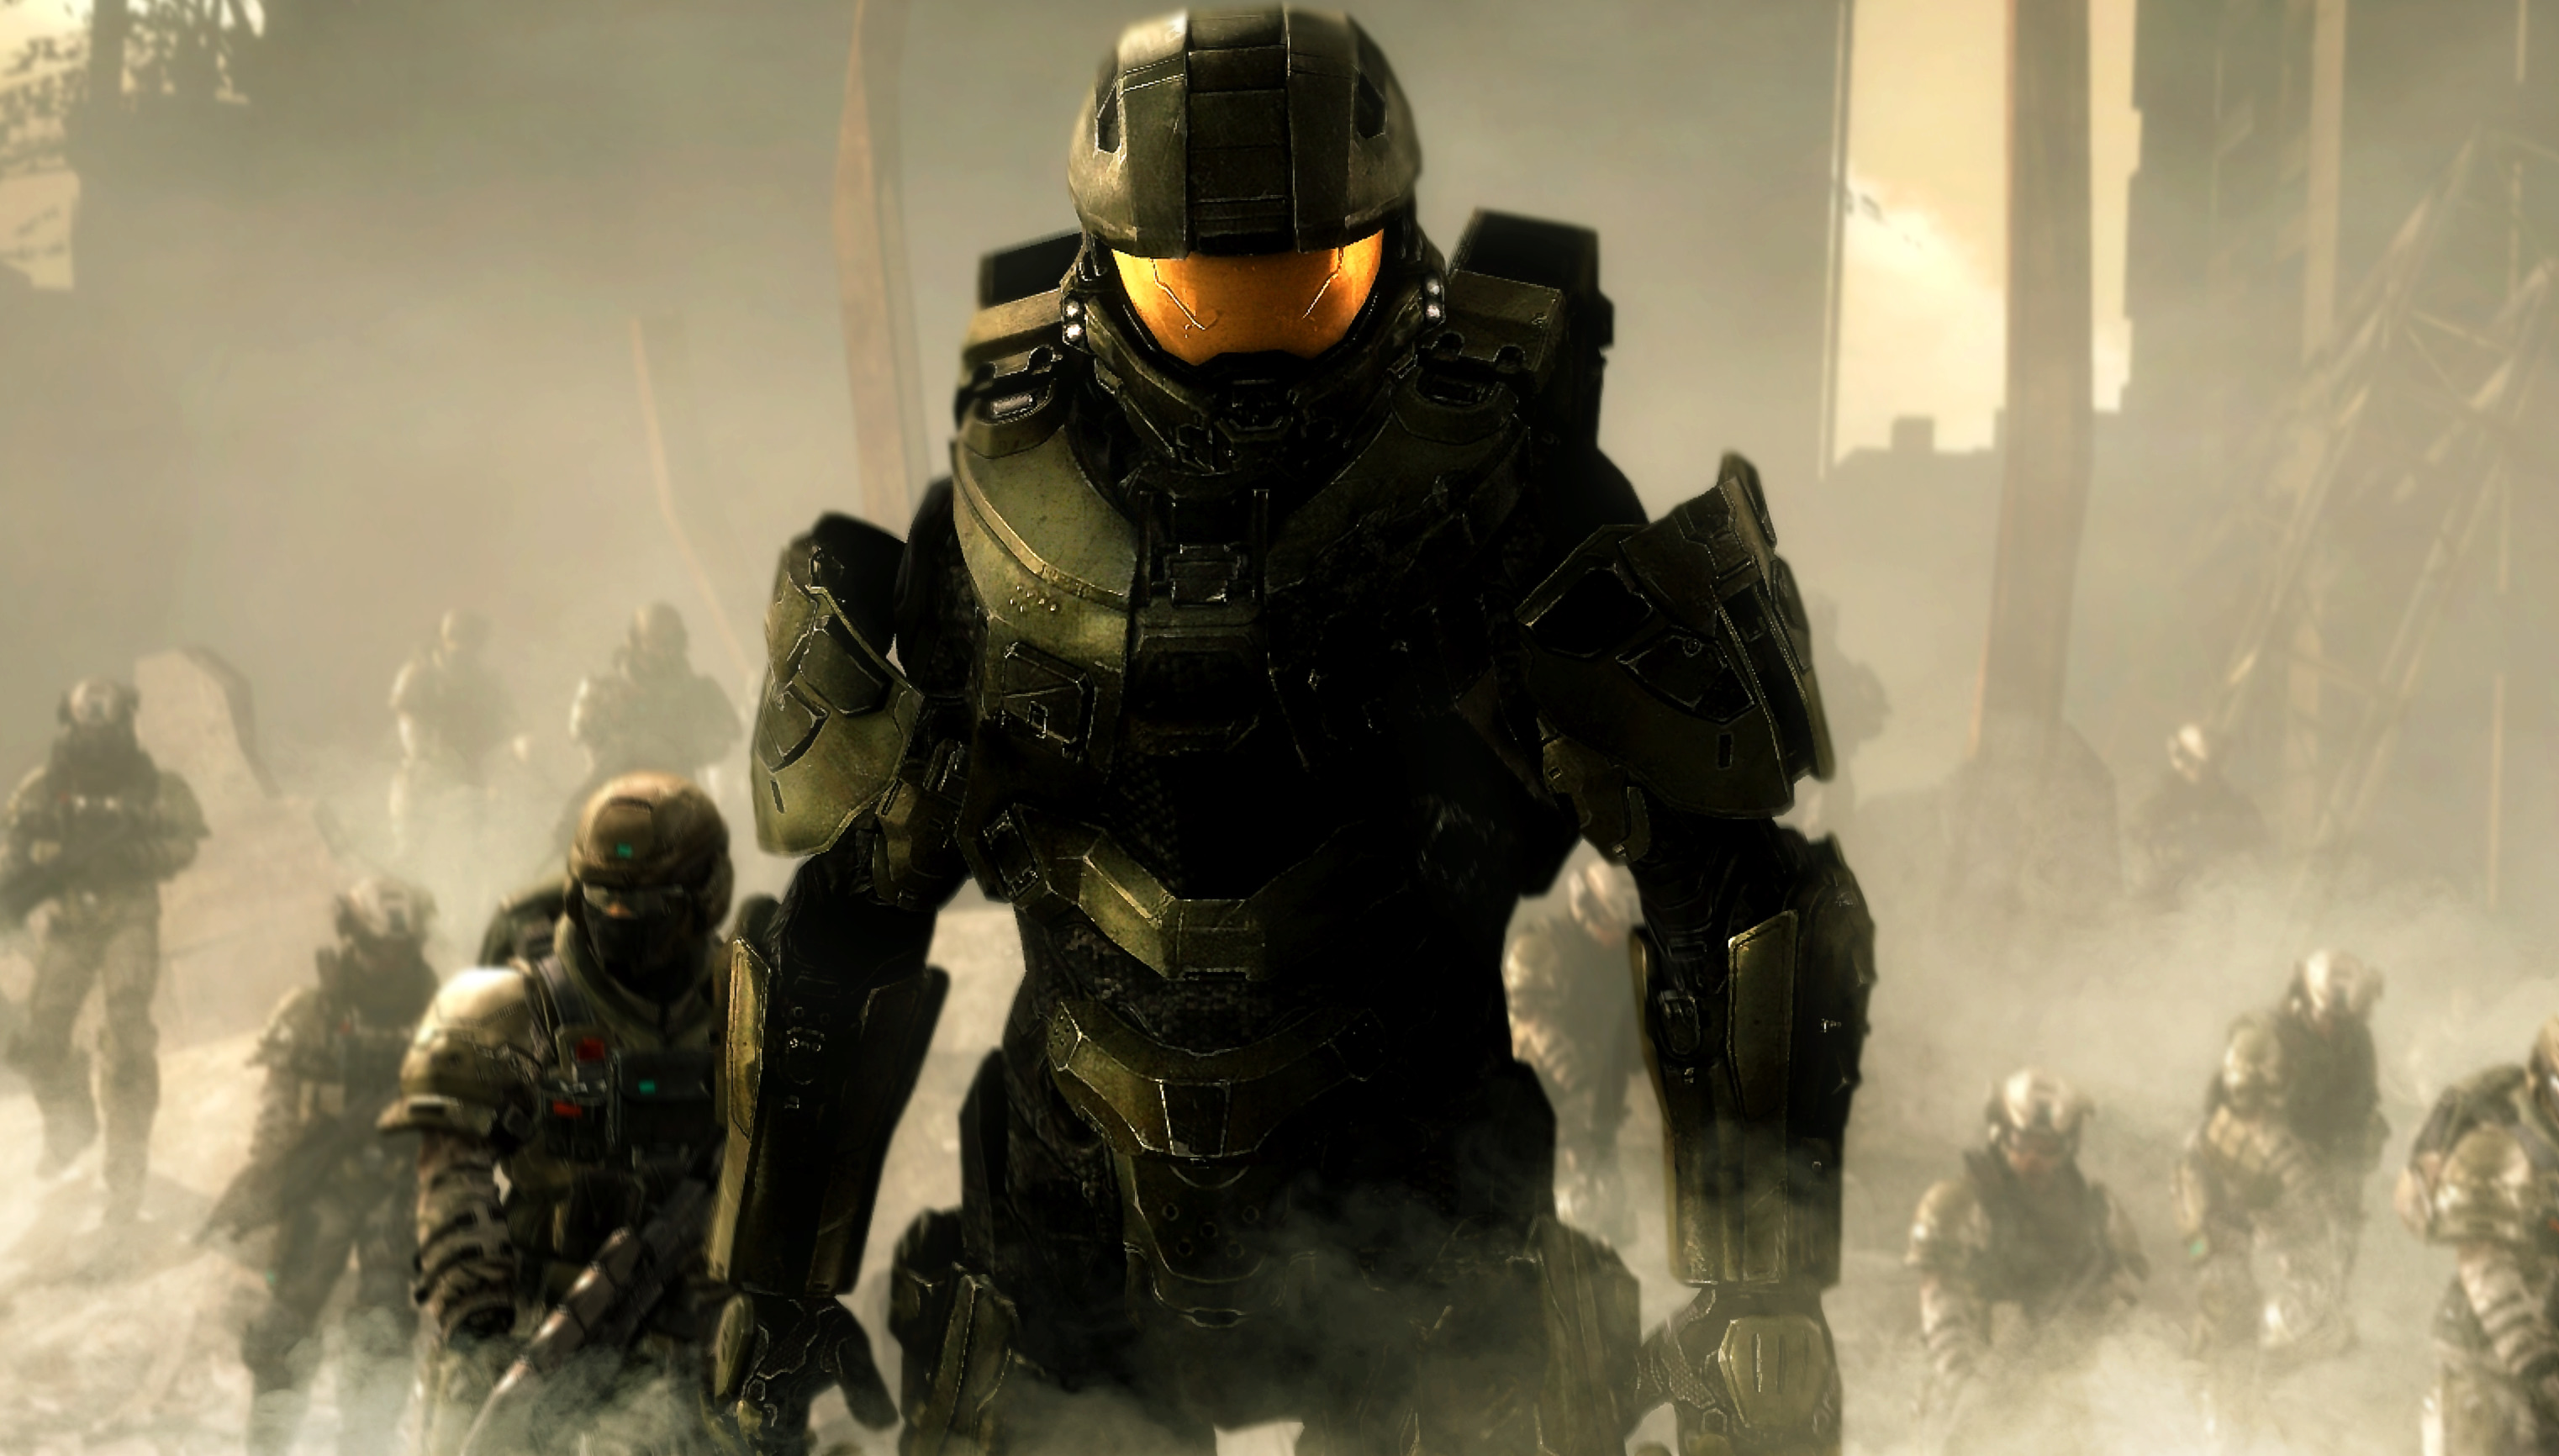 Halo, PC Gaming, Video Games, Halo 4 Wallpapers HD ...